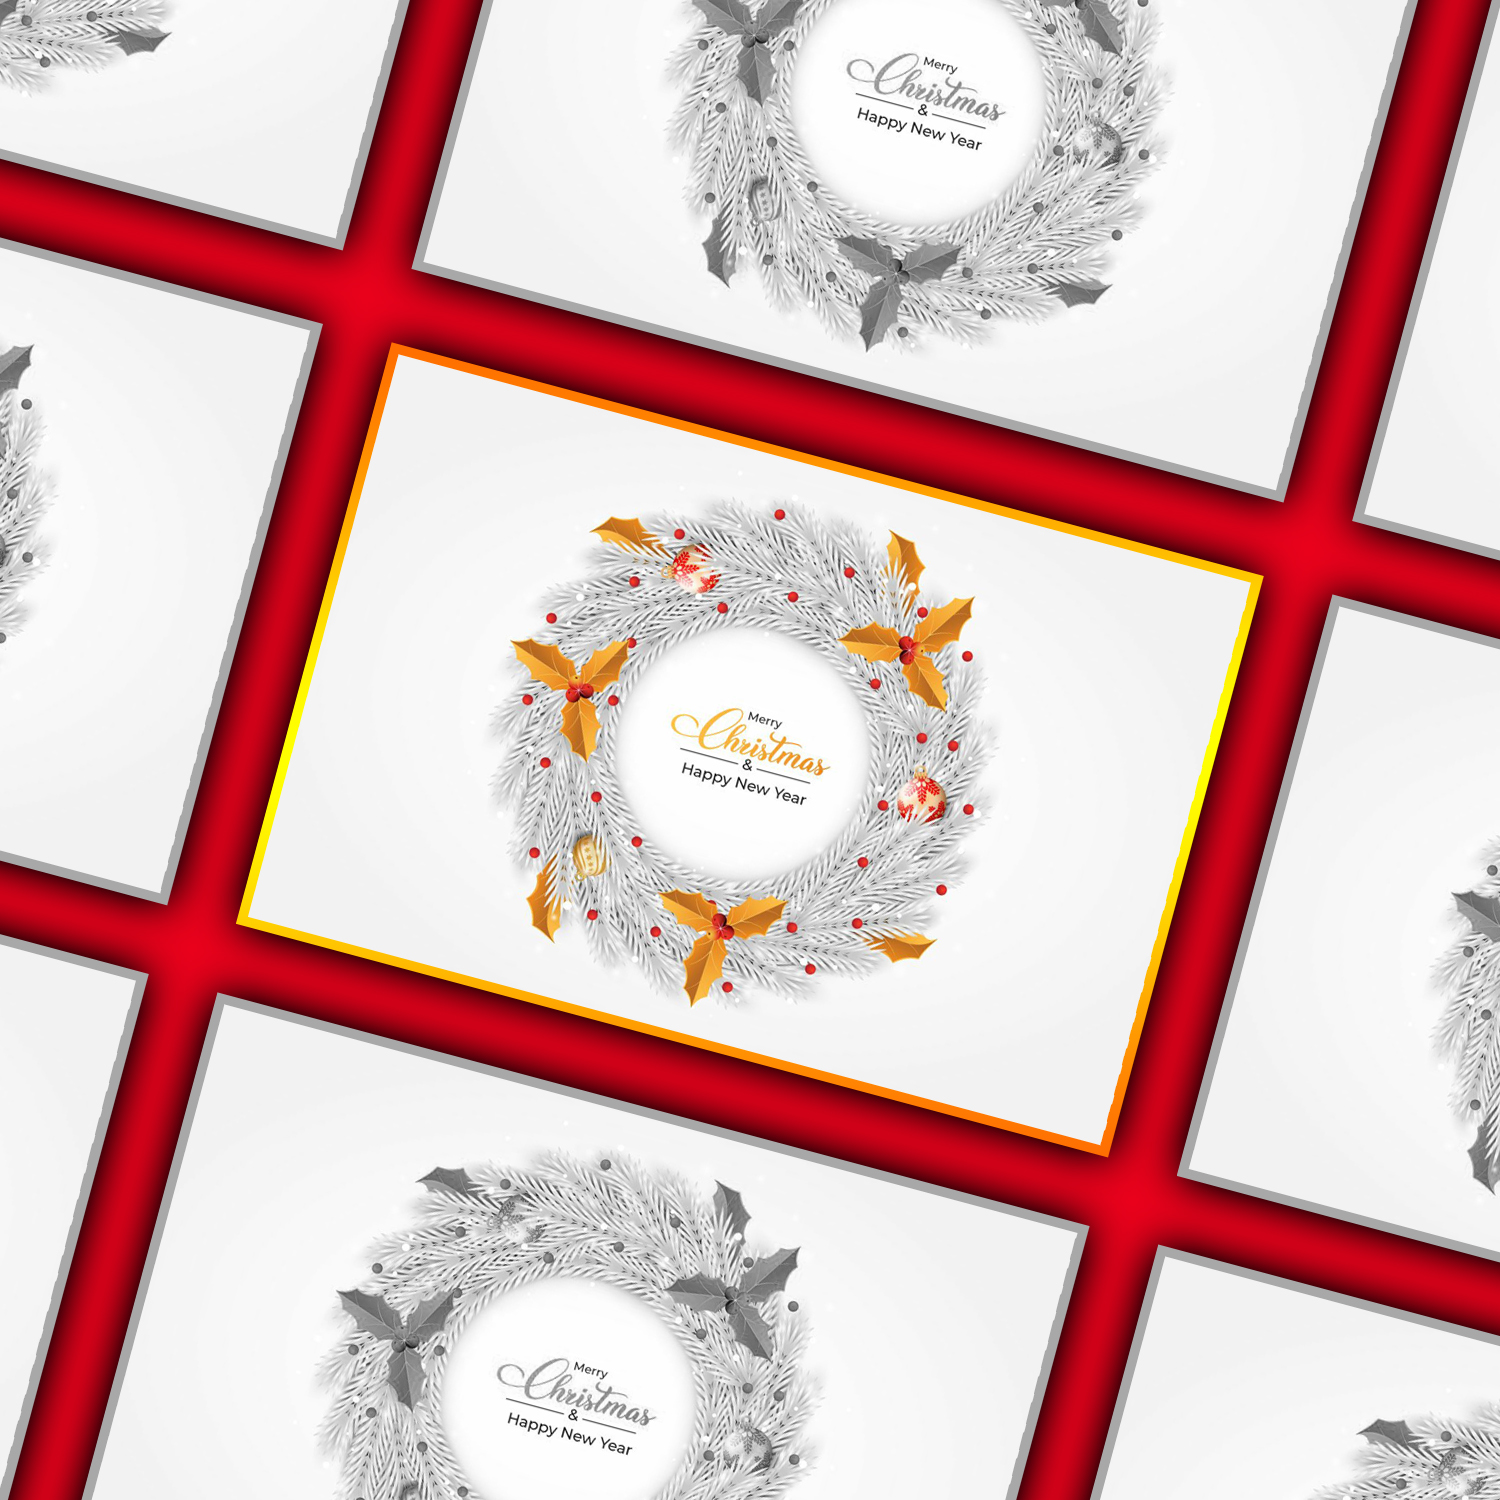 Christmas White Wreath Red Golden Ball cover.